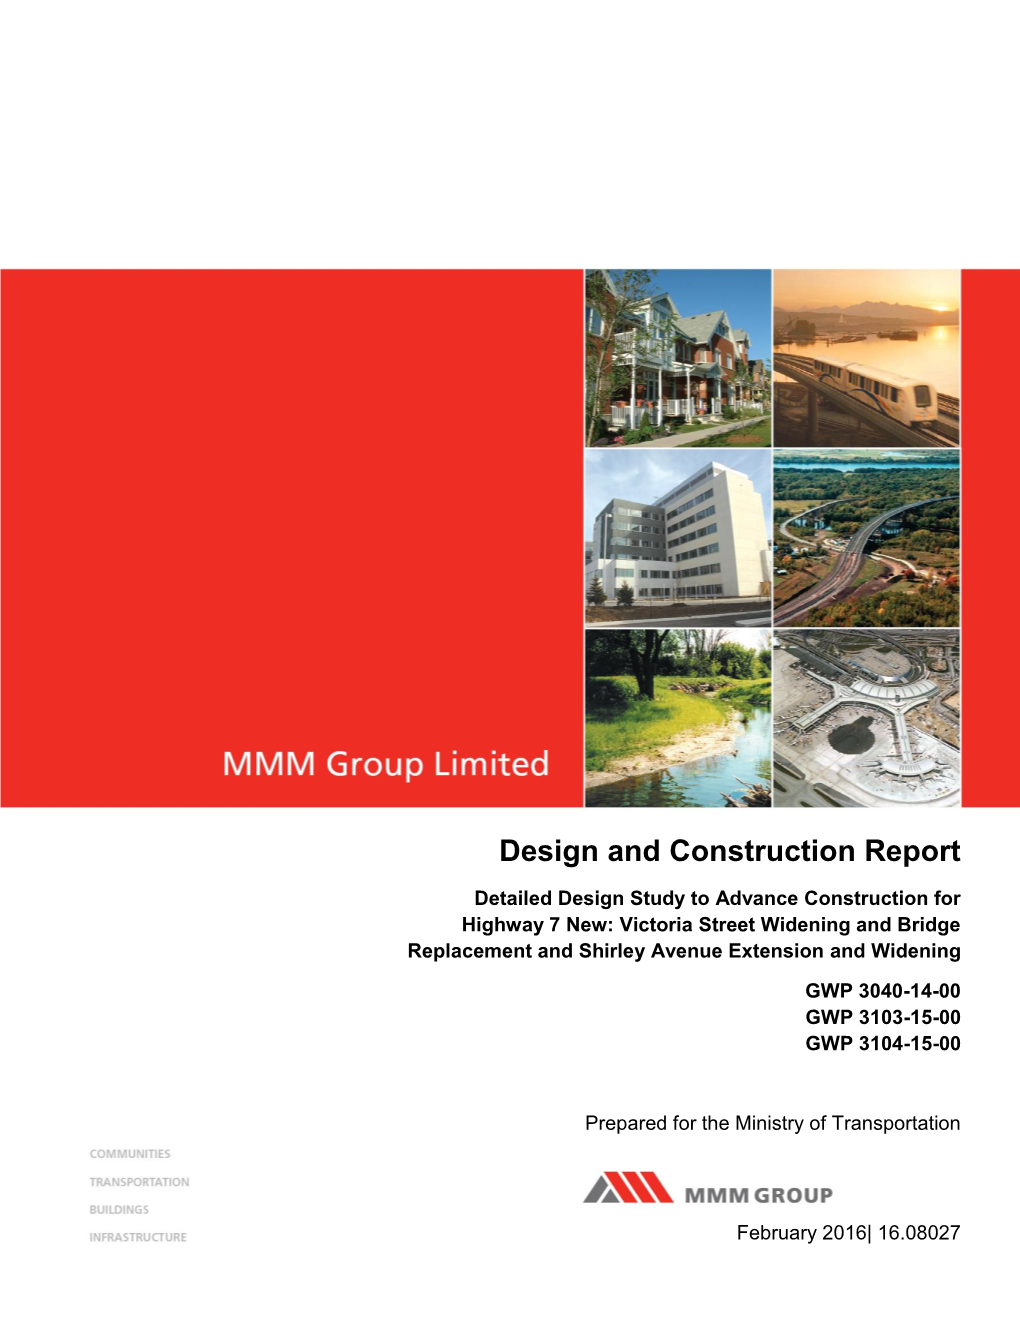 Final Design and Construction Report